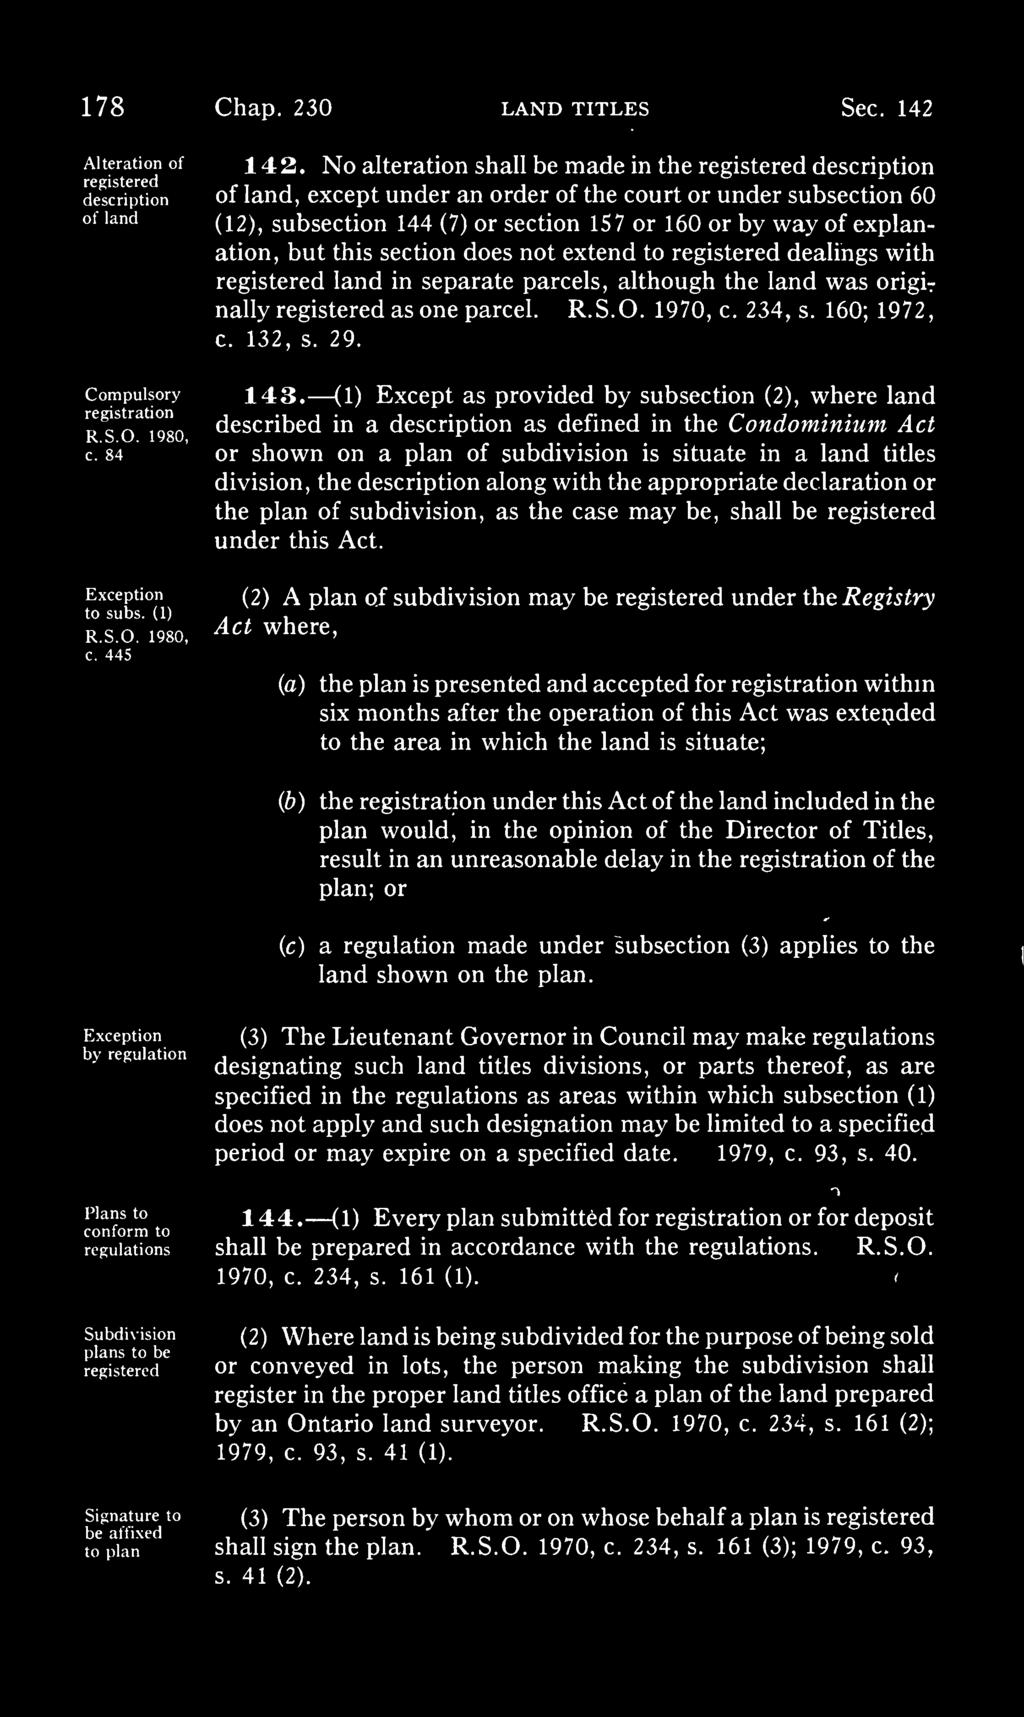 but this section does not extend to registered dealings with registered land in separate parcels, although the land was originally registered as one parcel. R.S.O. 1970, c. 234, s. 160; 1972, c.